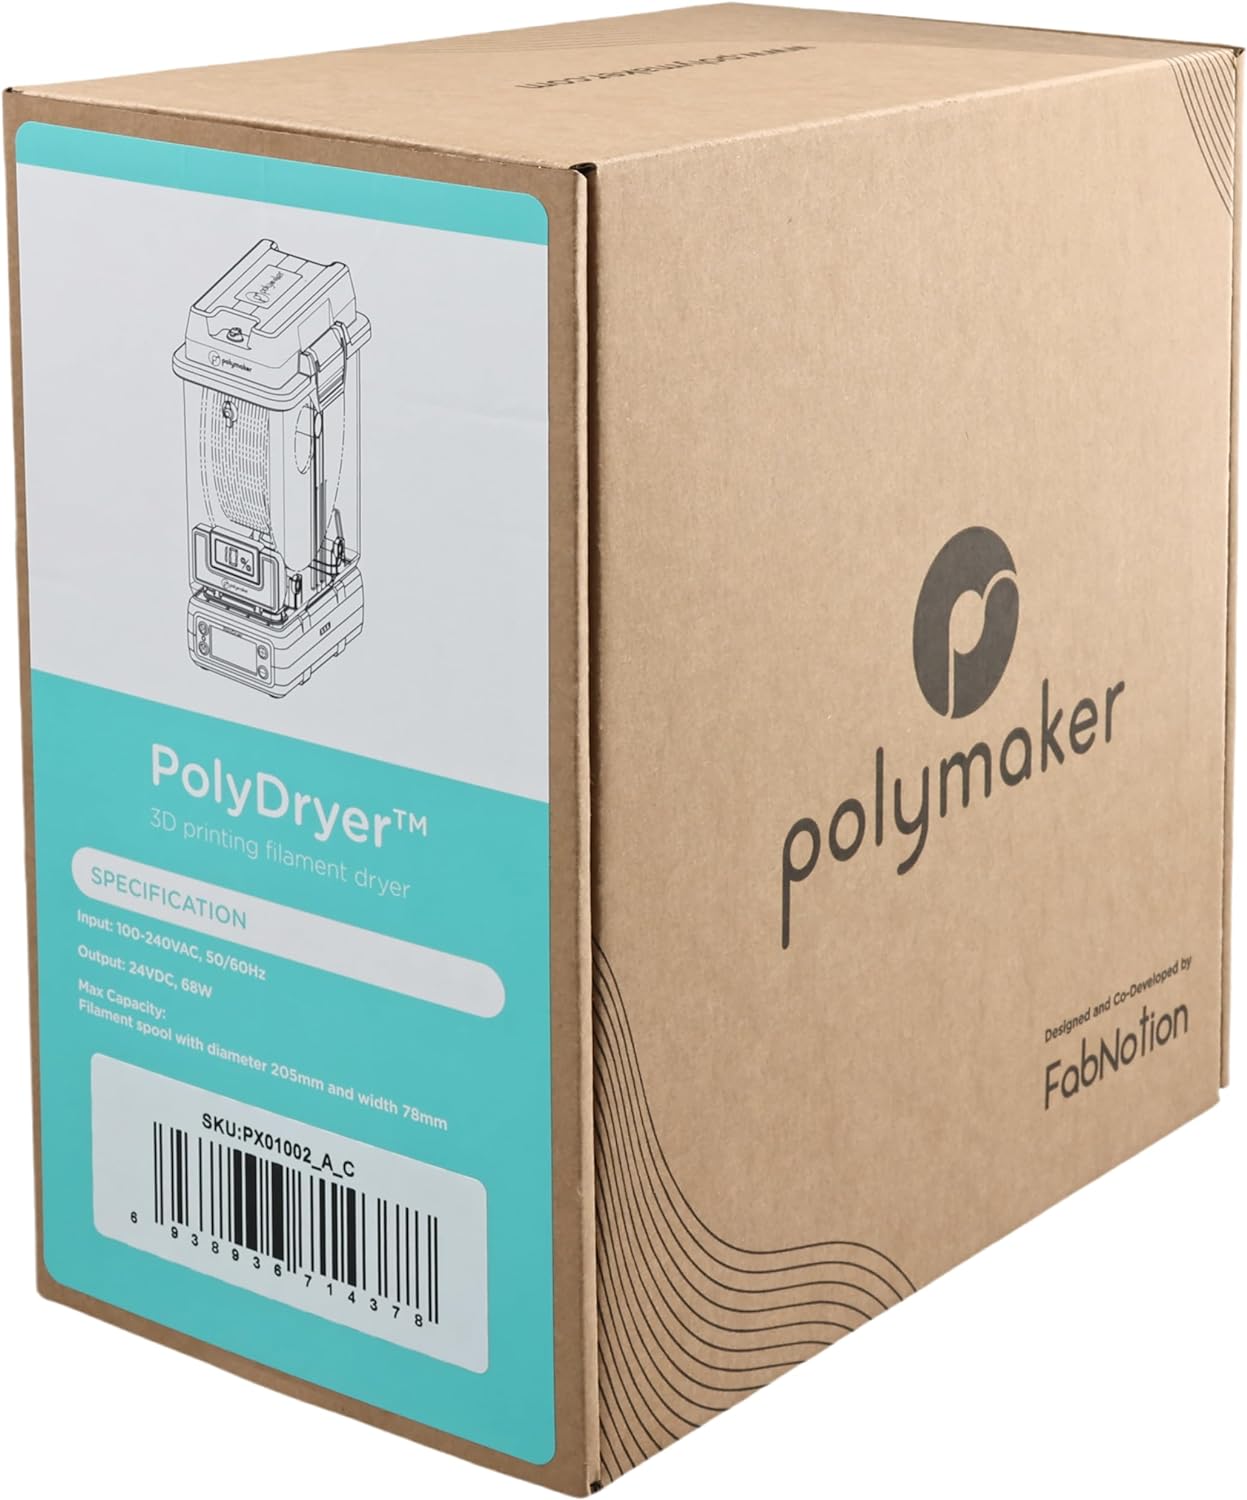 PolyDryer from Polymaker